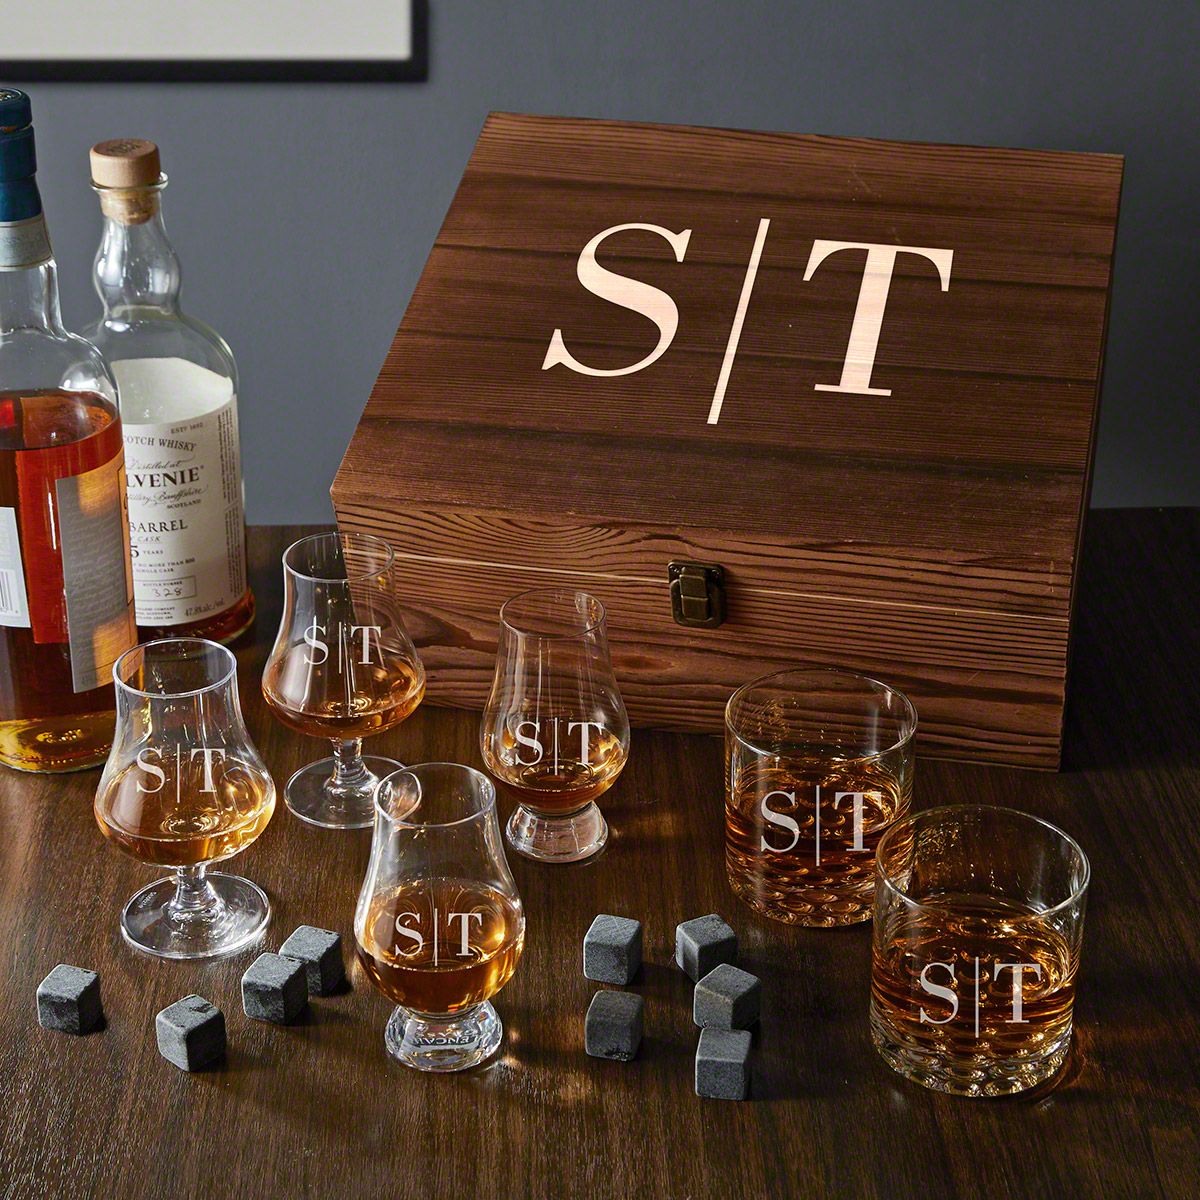 https://images.homewetbar.com/media/catalog/product/q/u/quinton-custom-box-set-of-gifts-for-whiskey-lovers_9628.jpg?store=default&image-type=image